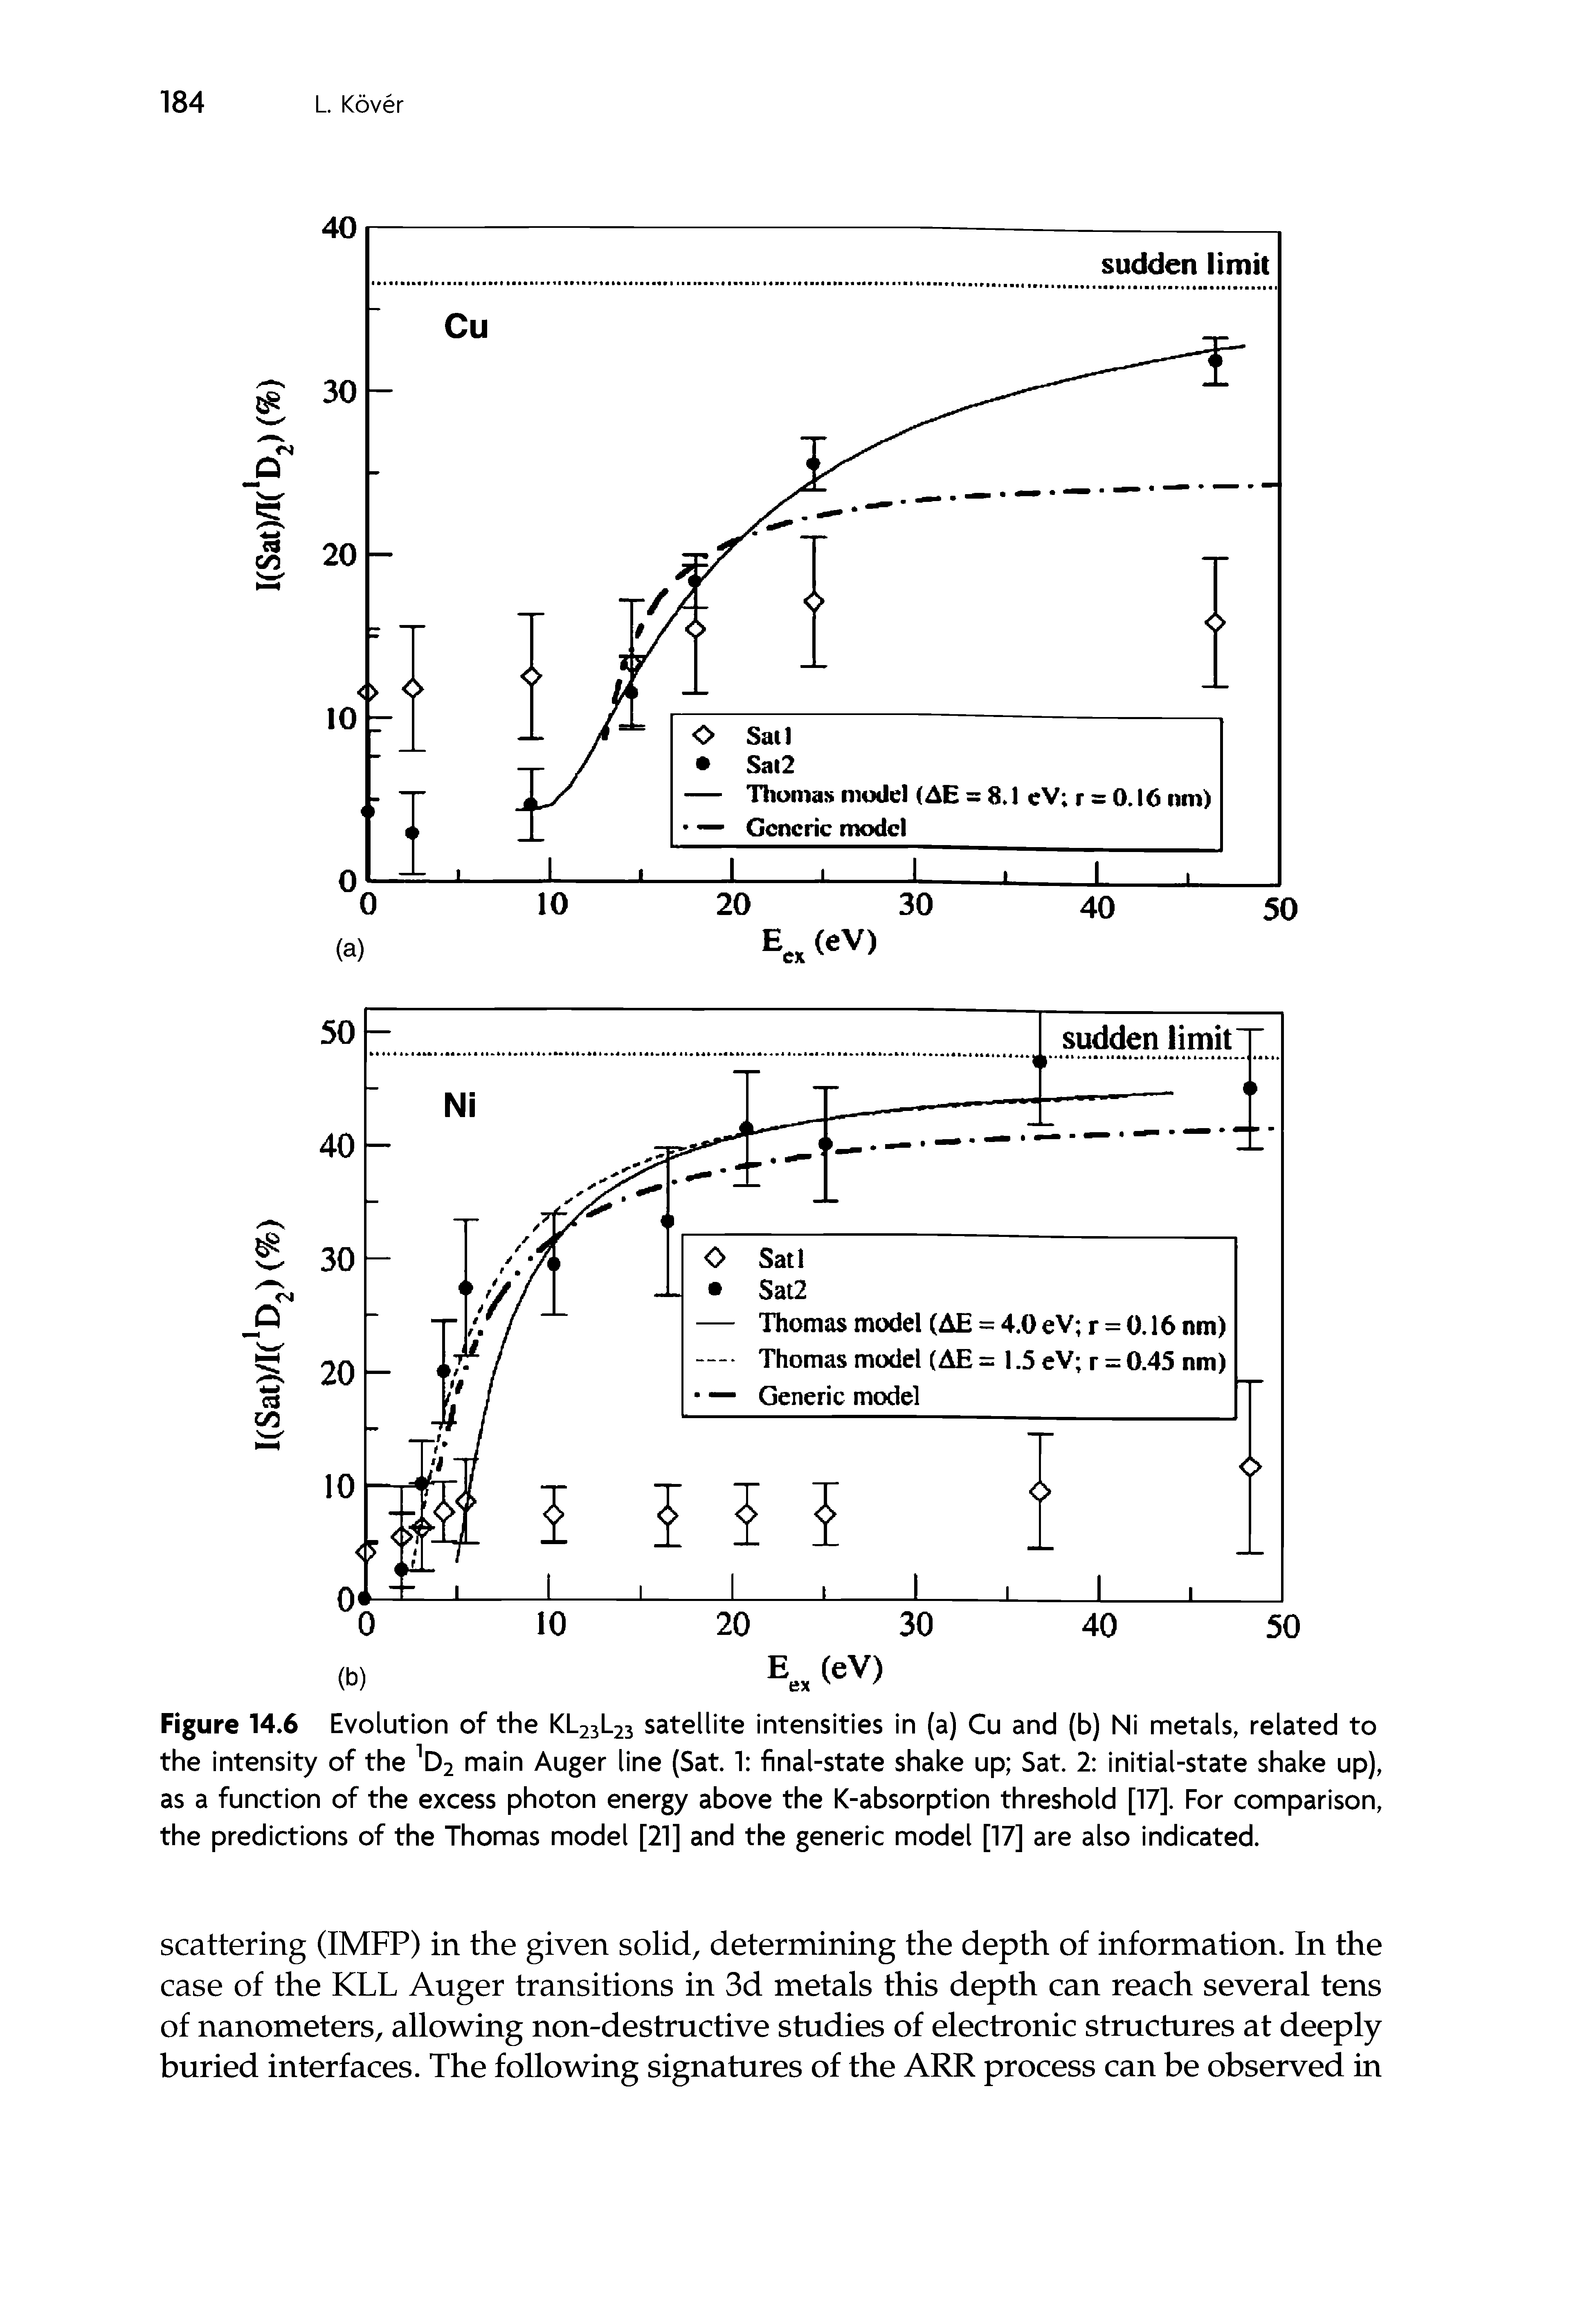 Figure 14.6 Evolution of the KL23L23 satellite intensities in (a) Cu and (b) Ni metals, related to the intensity of the ]D2 main Auger line (Sat 1 final-state shake up Sat 2 initial-state shake up), as a function of the excess photon energy above the K-absorption threshold [17]. For comparison, the predictions of the Thomas model [21] and the generic model [17] are also indicated.